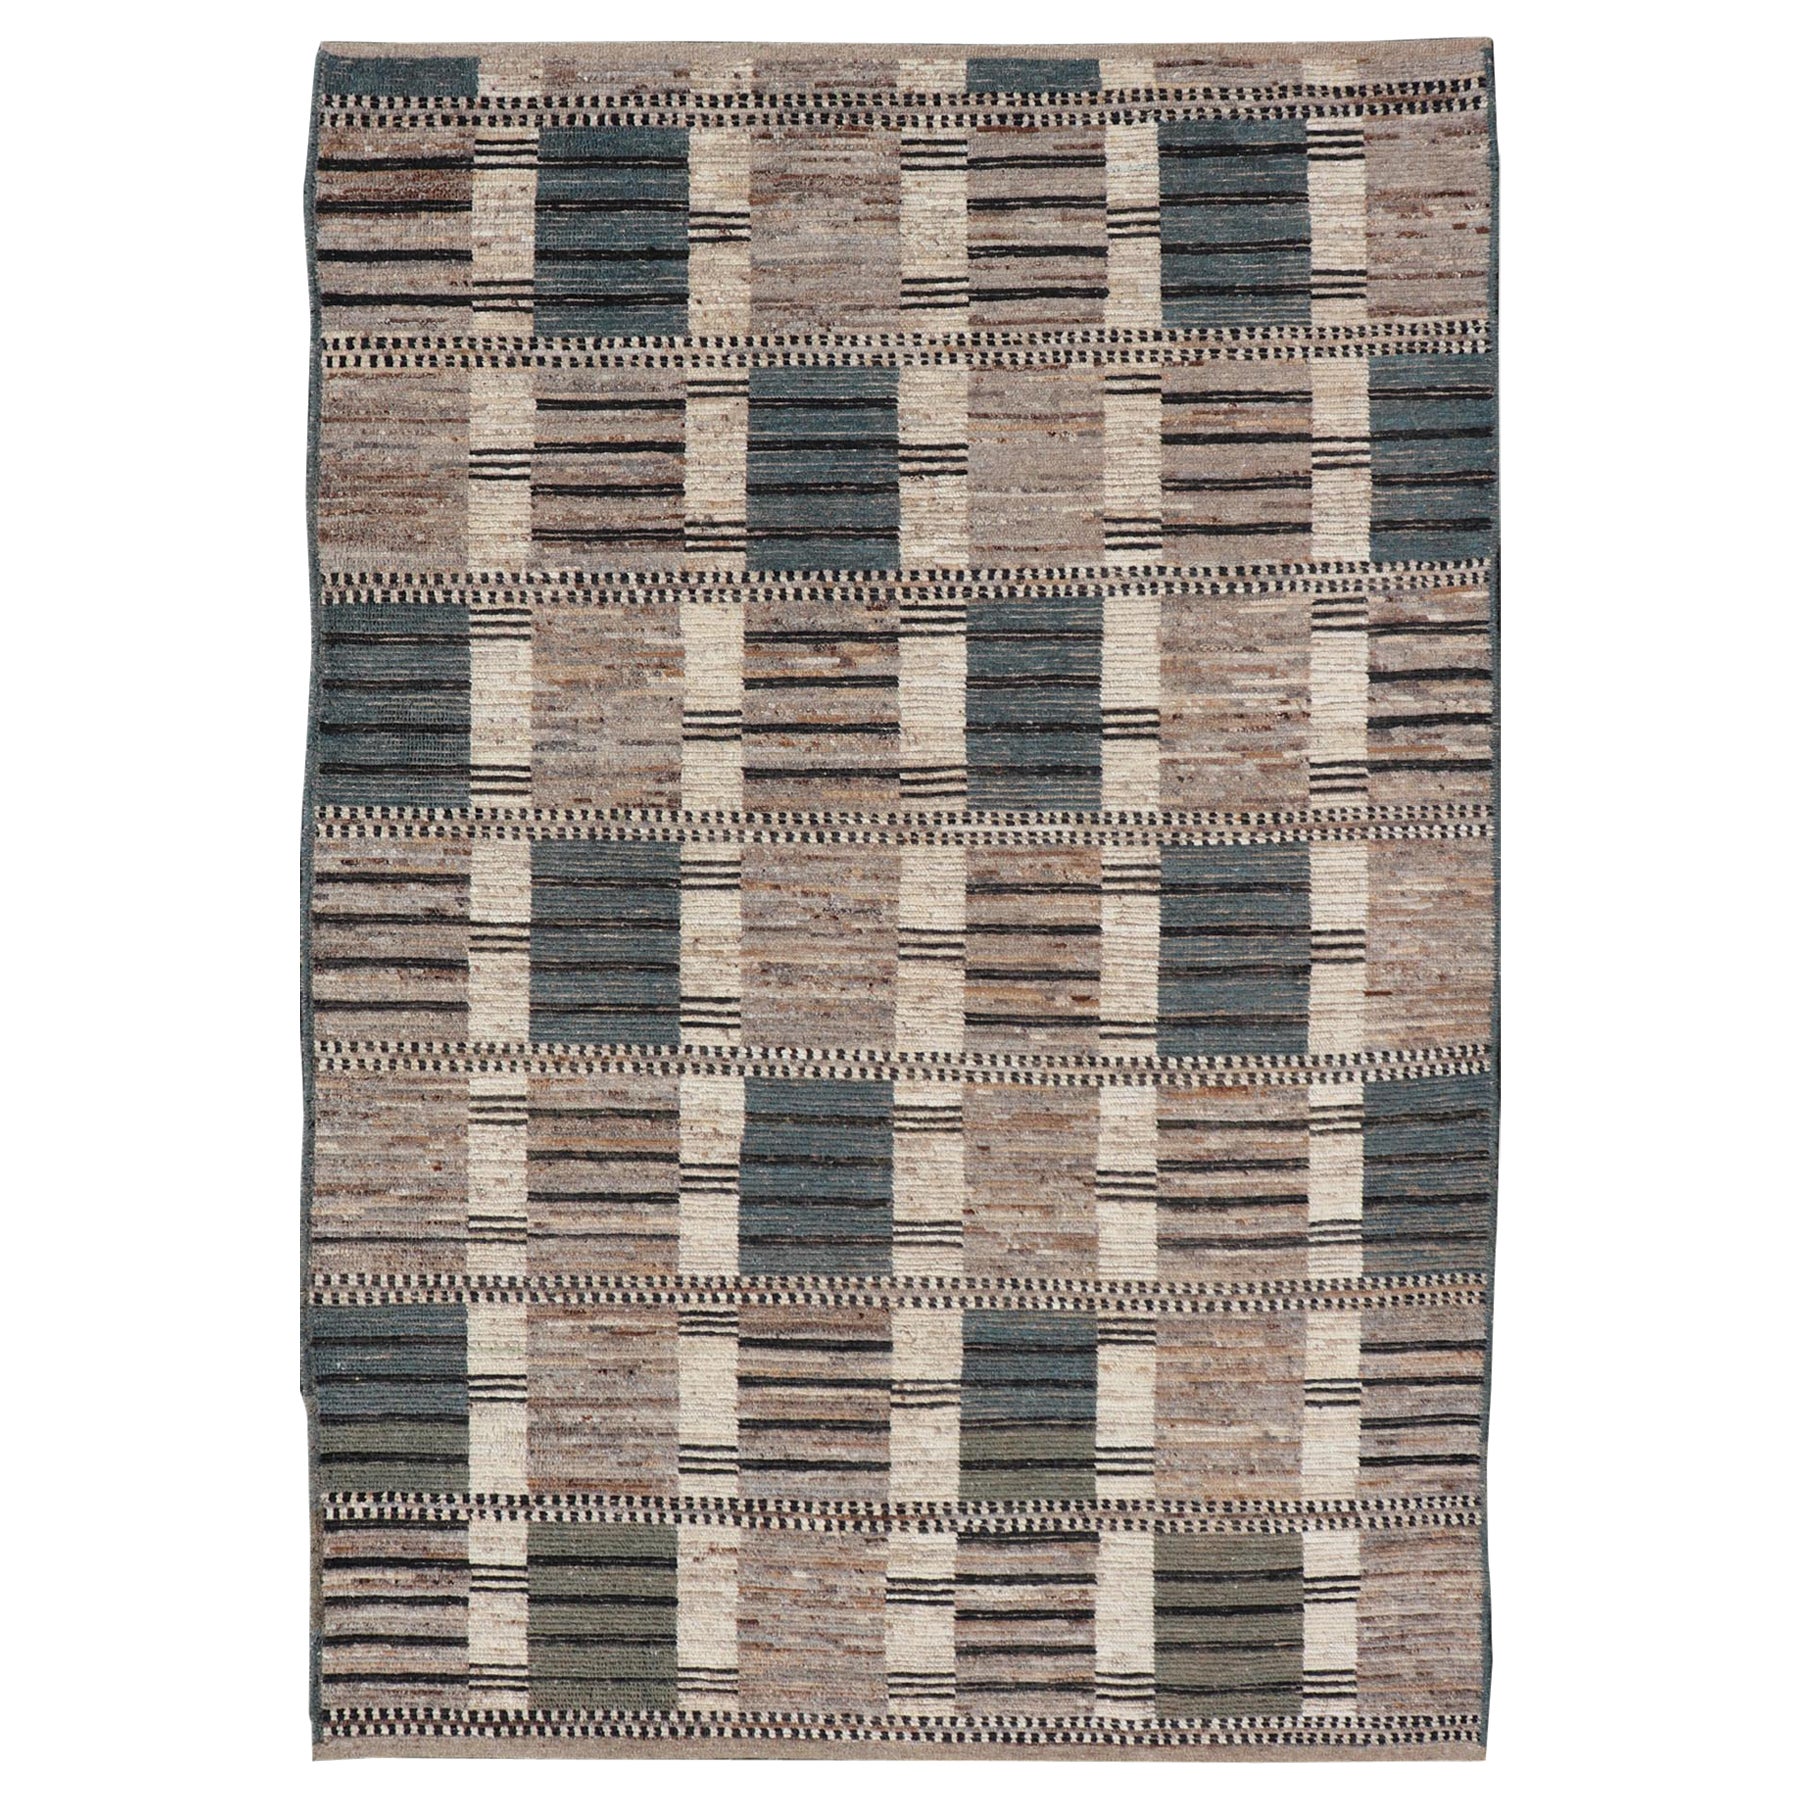 Modern Casual Design Tribal Rug with Checkered Pattern in Teal, Cream, and Brown For Sale